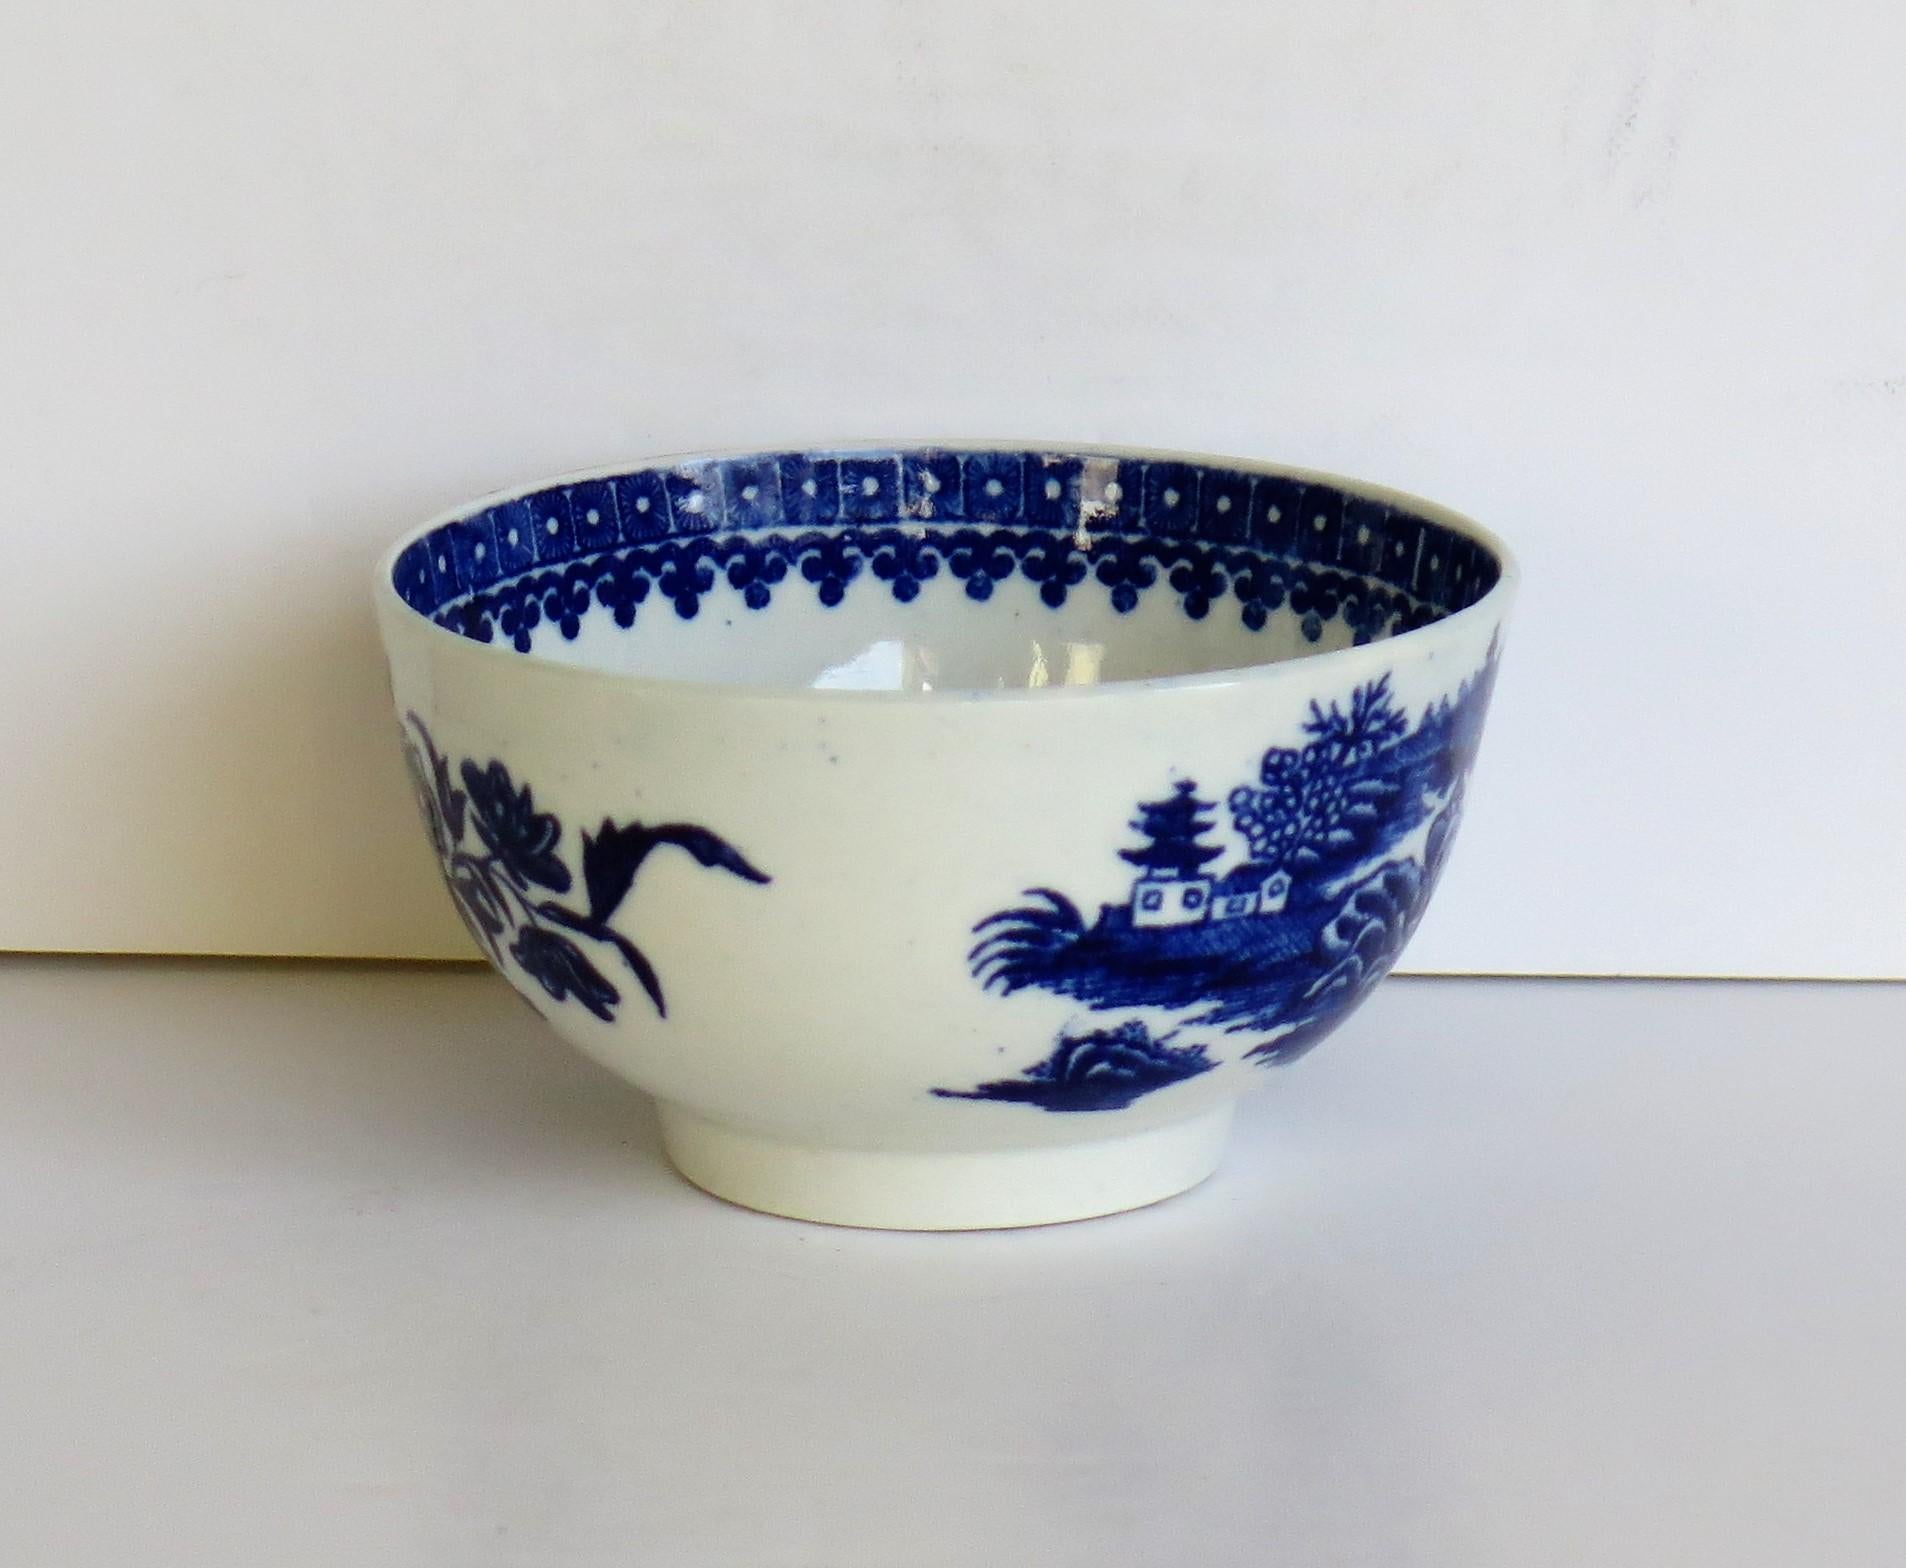 Glazed First Period Dr. Wall Worcester porcelain Blue Bowl in Fisherman Ptn, Circa 1775